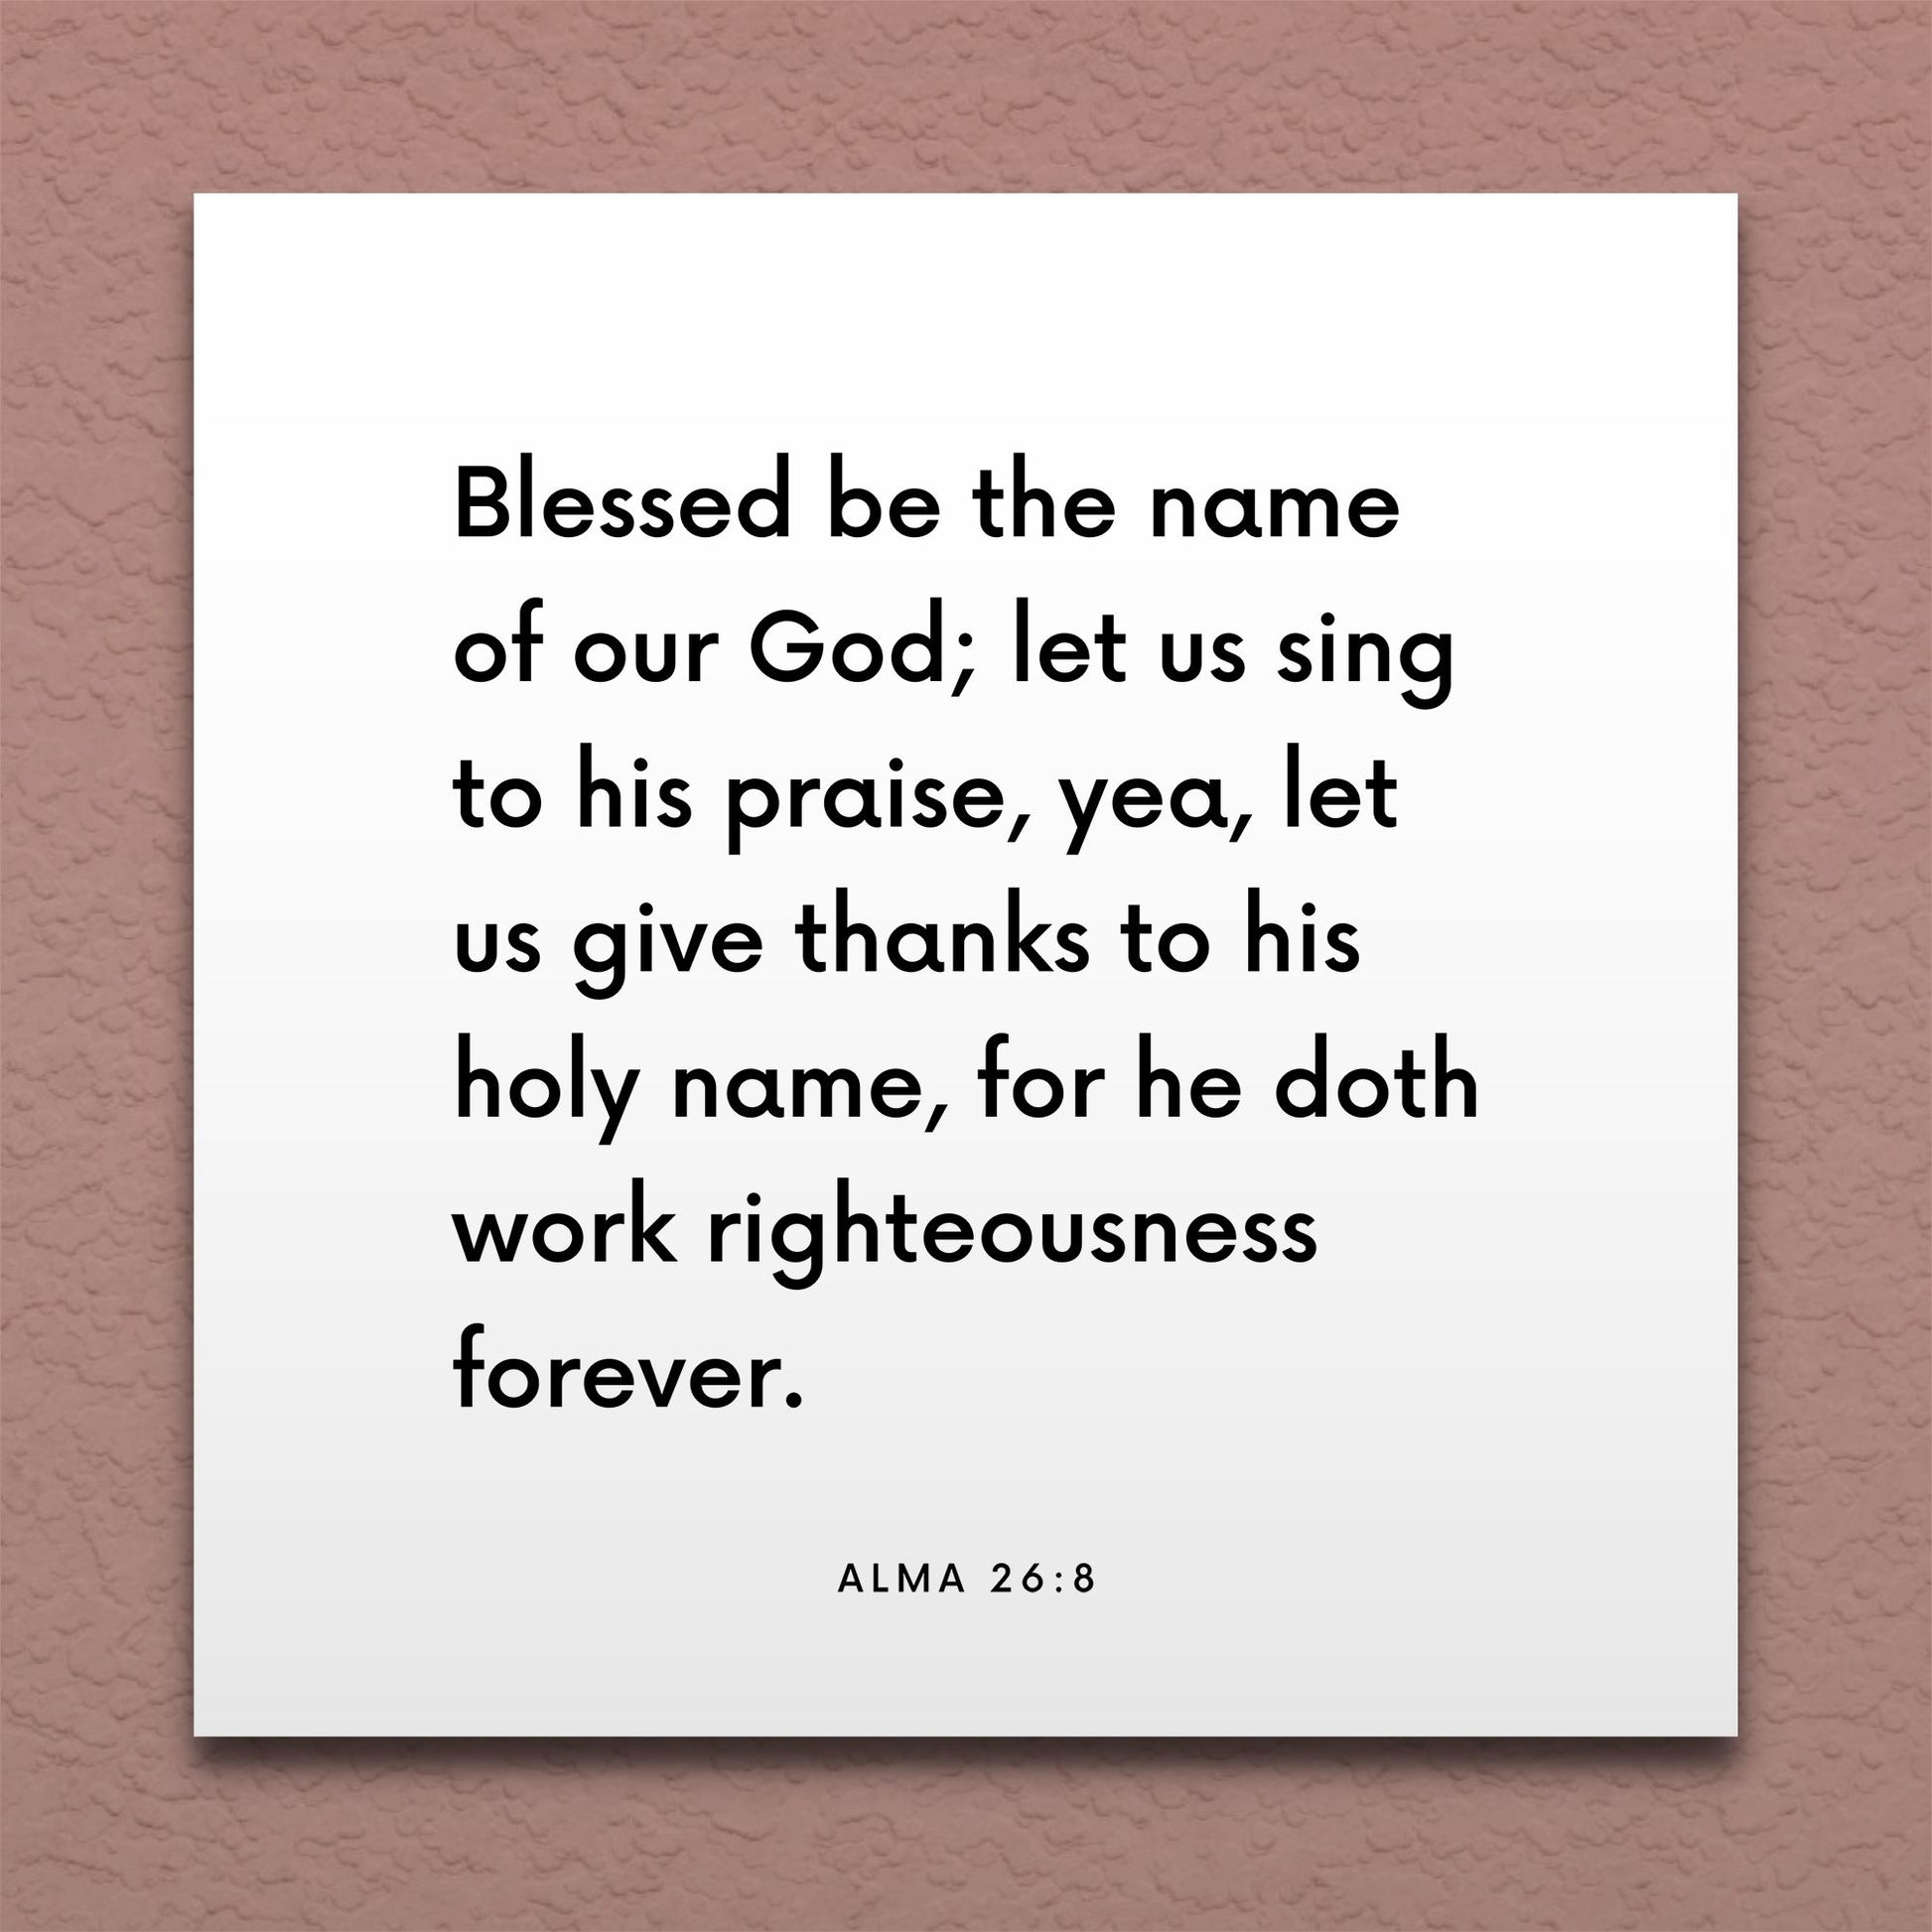 Wall-mounted scripture tile for Alma 26:8 - "Let us give thanks to his holy name"